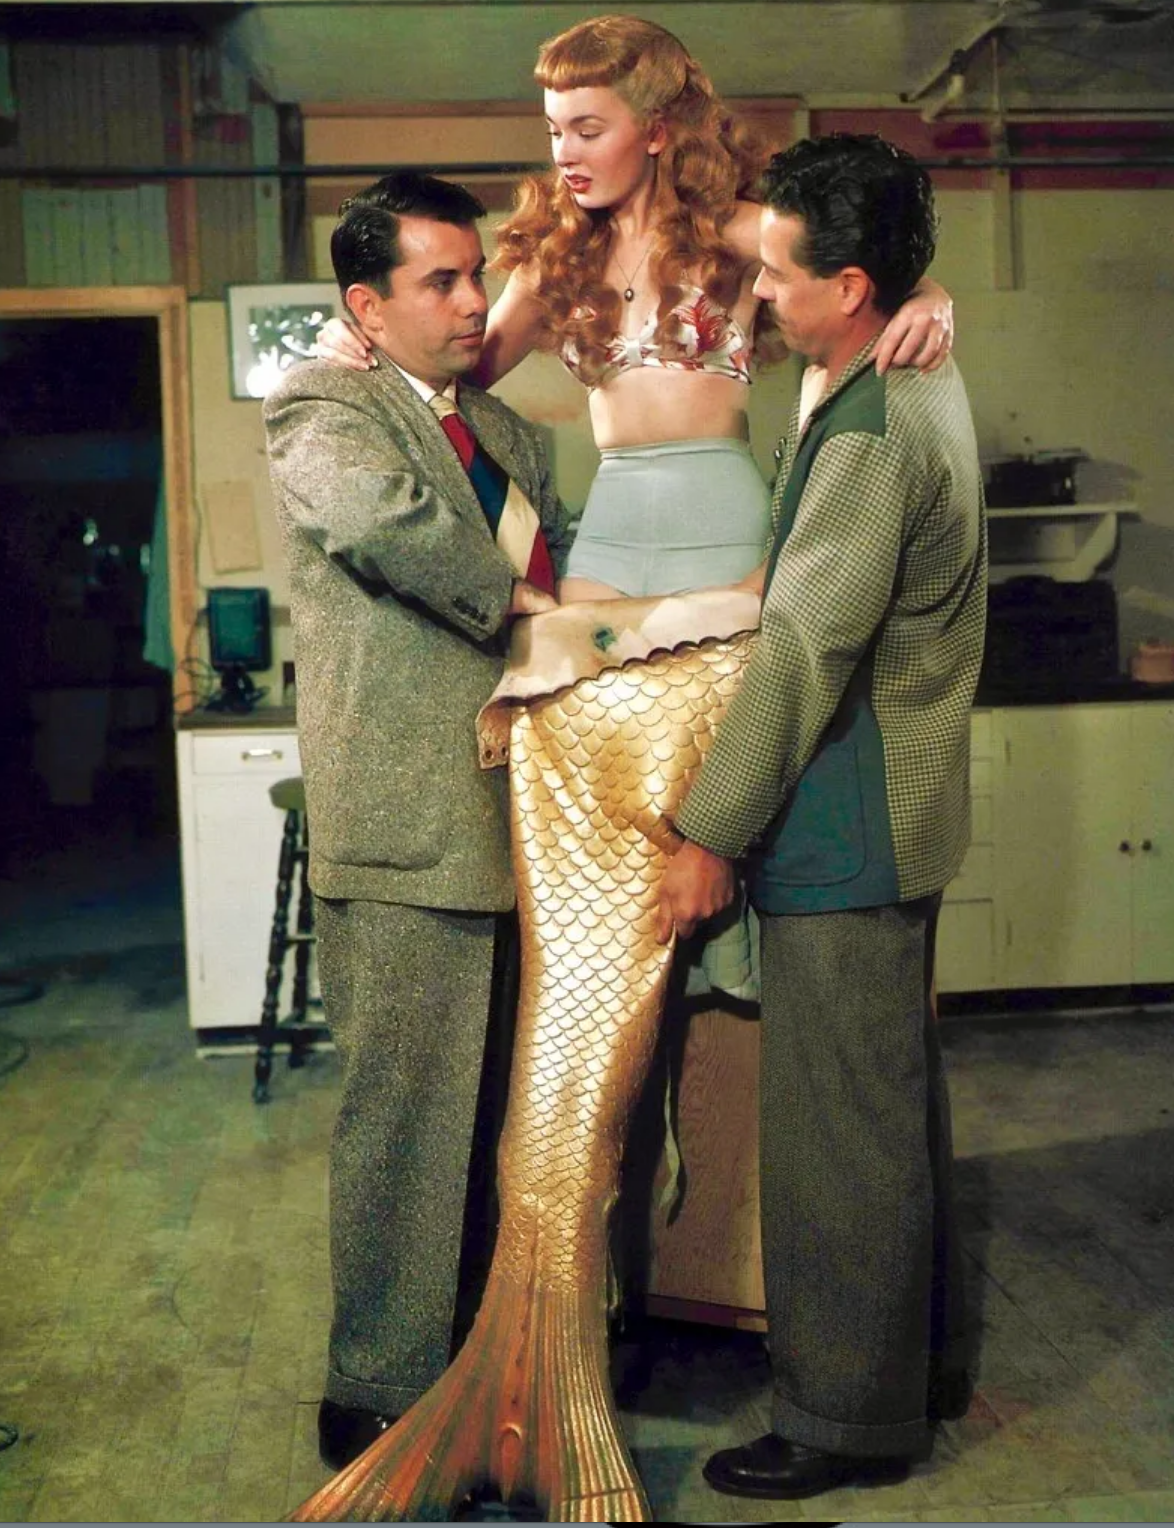   Behind the scenes photo from  Mr. Peabody and the Mermaid   1948   Makeup artist Bud Westmore (left) was charged with the creation of the tail for actress Ann Blyth in Universal’s production of  Mr. Peabody and the Mermaid . The task proved to be a